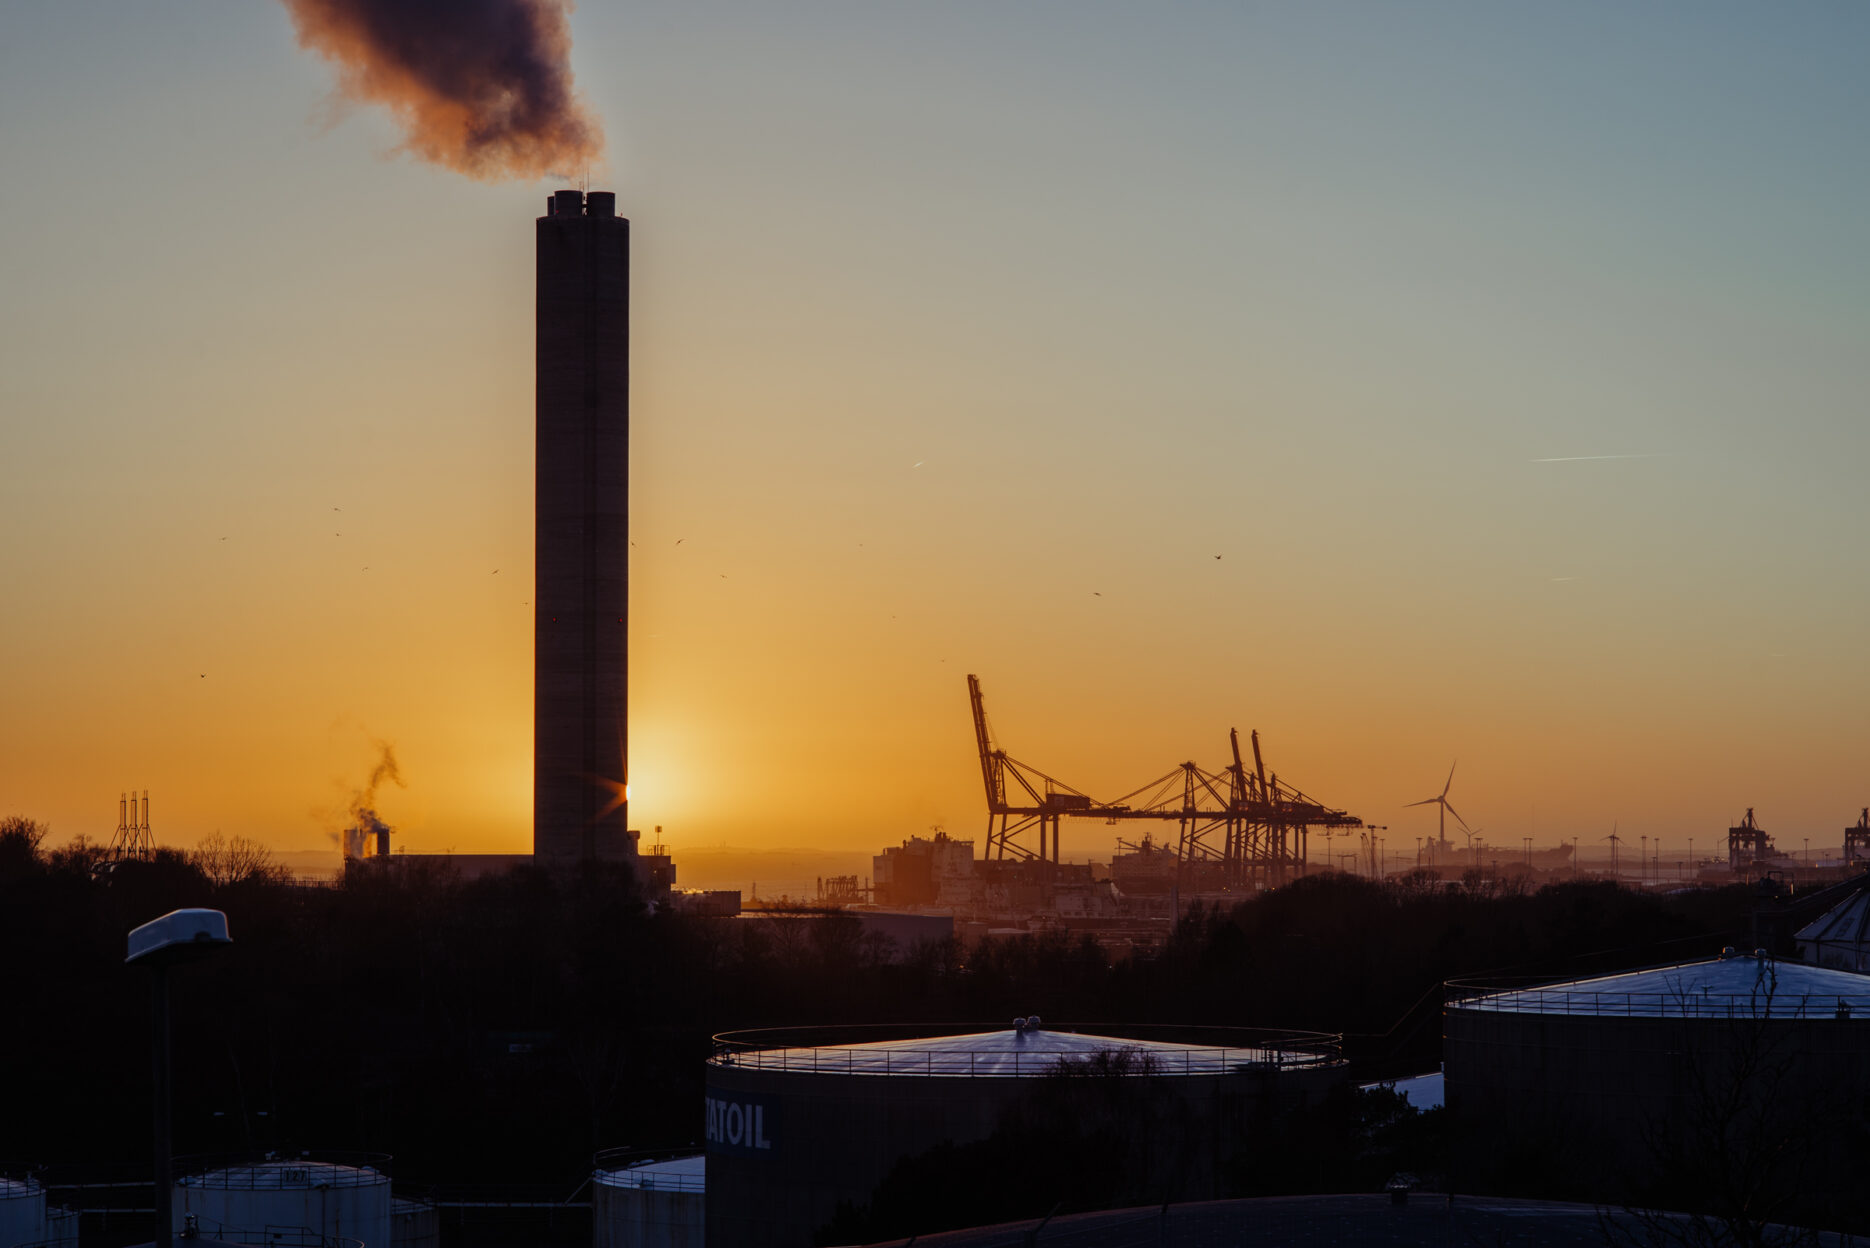 Industrial buildings, cranes and a large chimney against a beautiful sunset